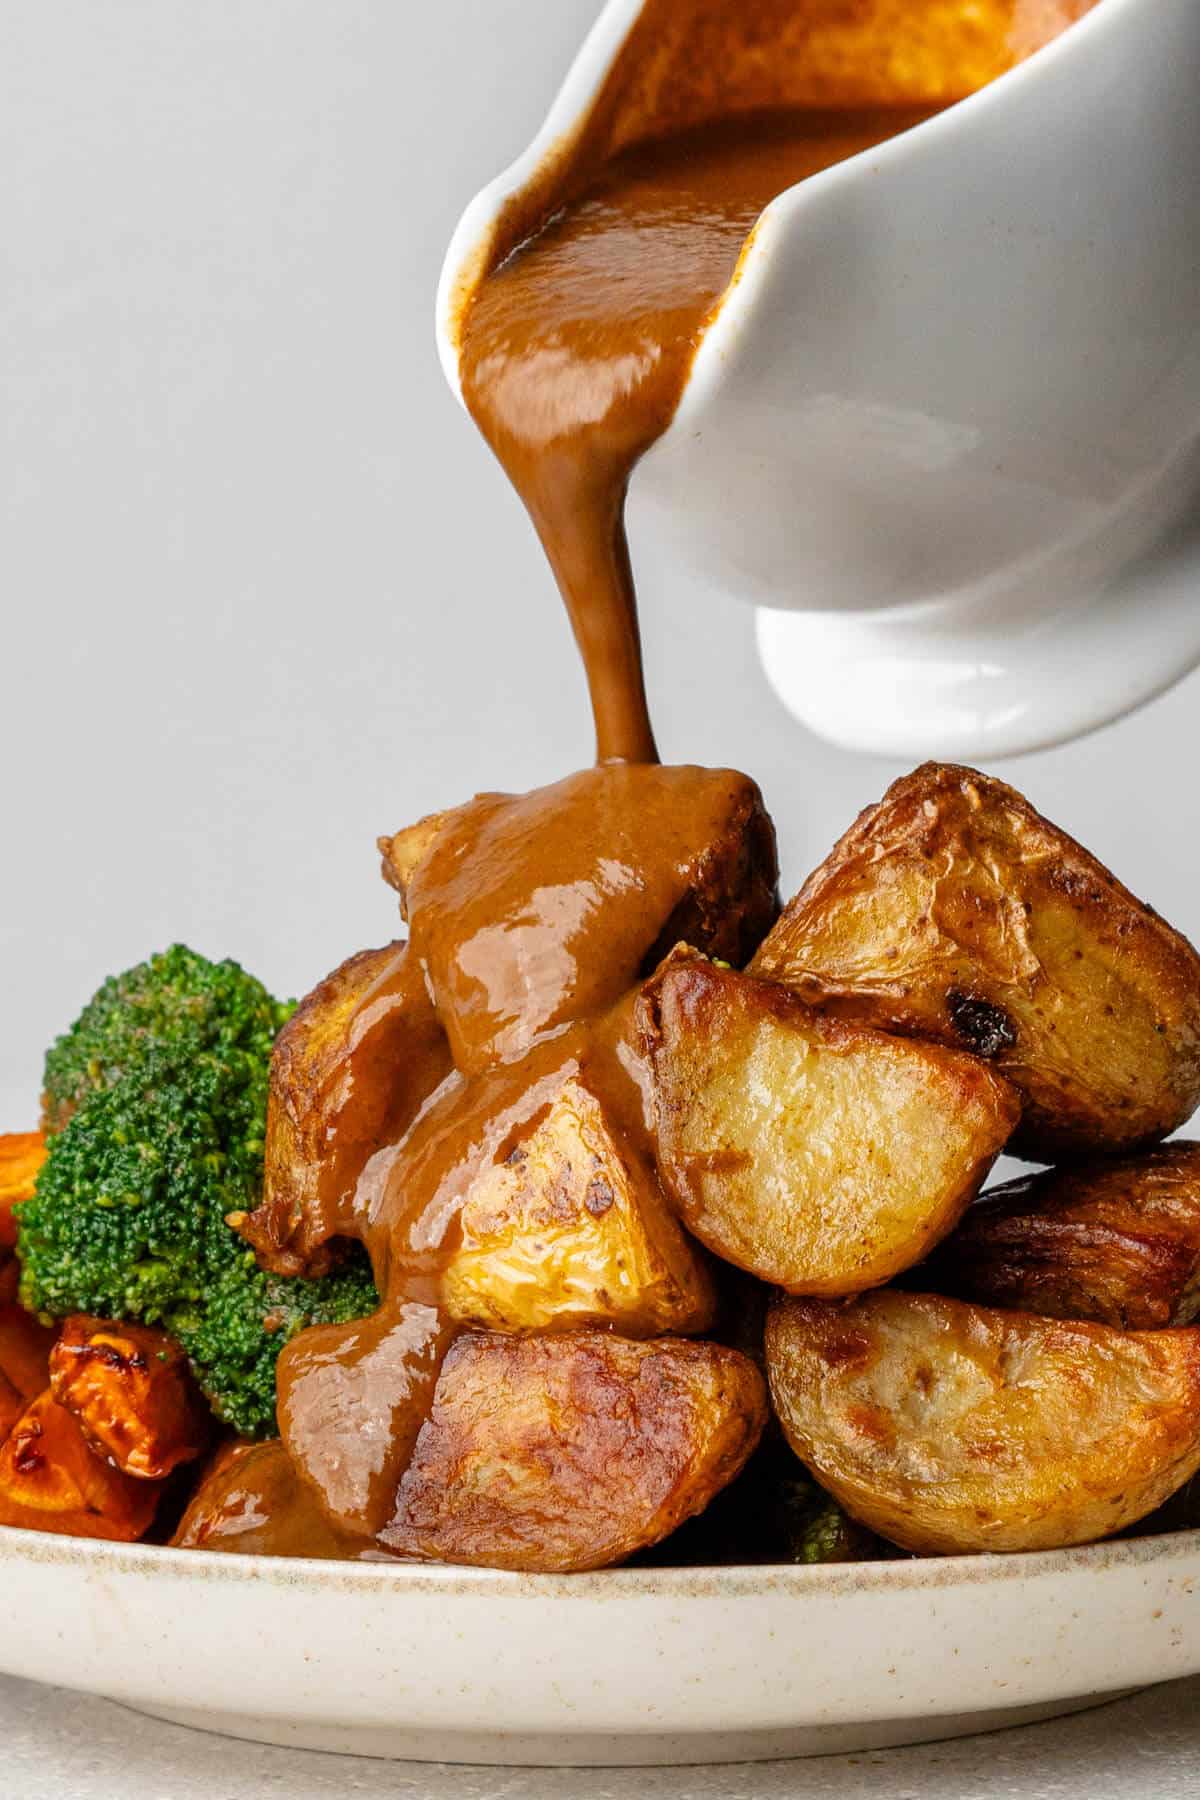 Motion shot of gravy being poured on top of roasted potatoes